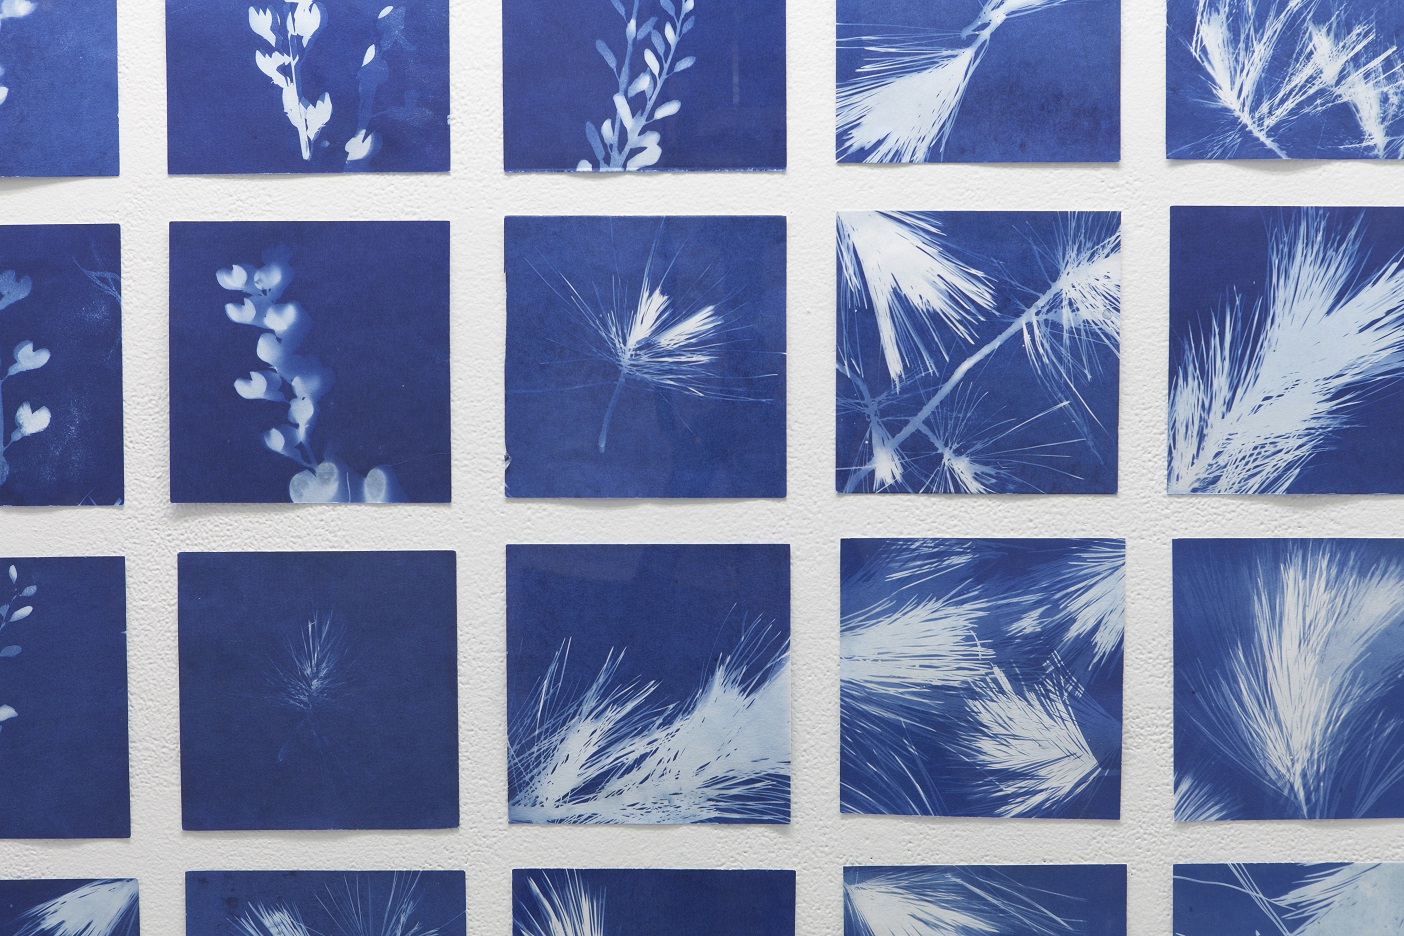  In the same breath, installation shot of cyanotypes  Collaboration with Joële Walinga September 7 - October 13, 2018 Gallery 44, Toronto  This exhibition investigates the transference of memory from one living thing to another. "In the same breath" 